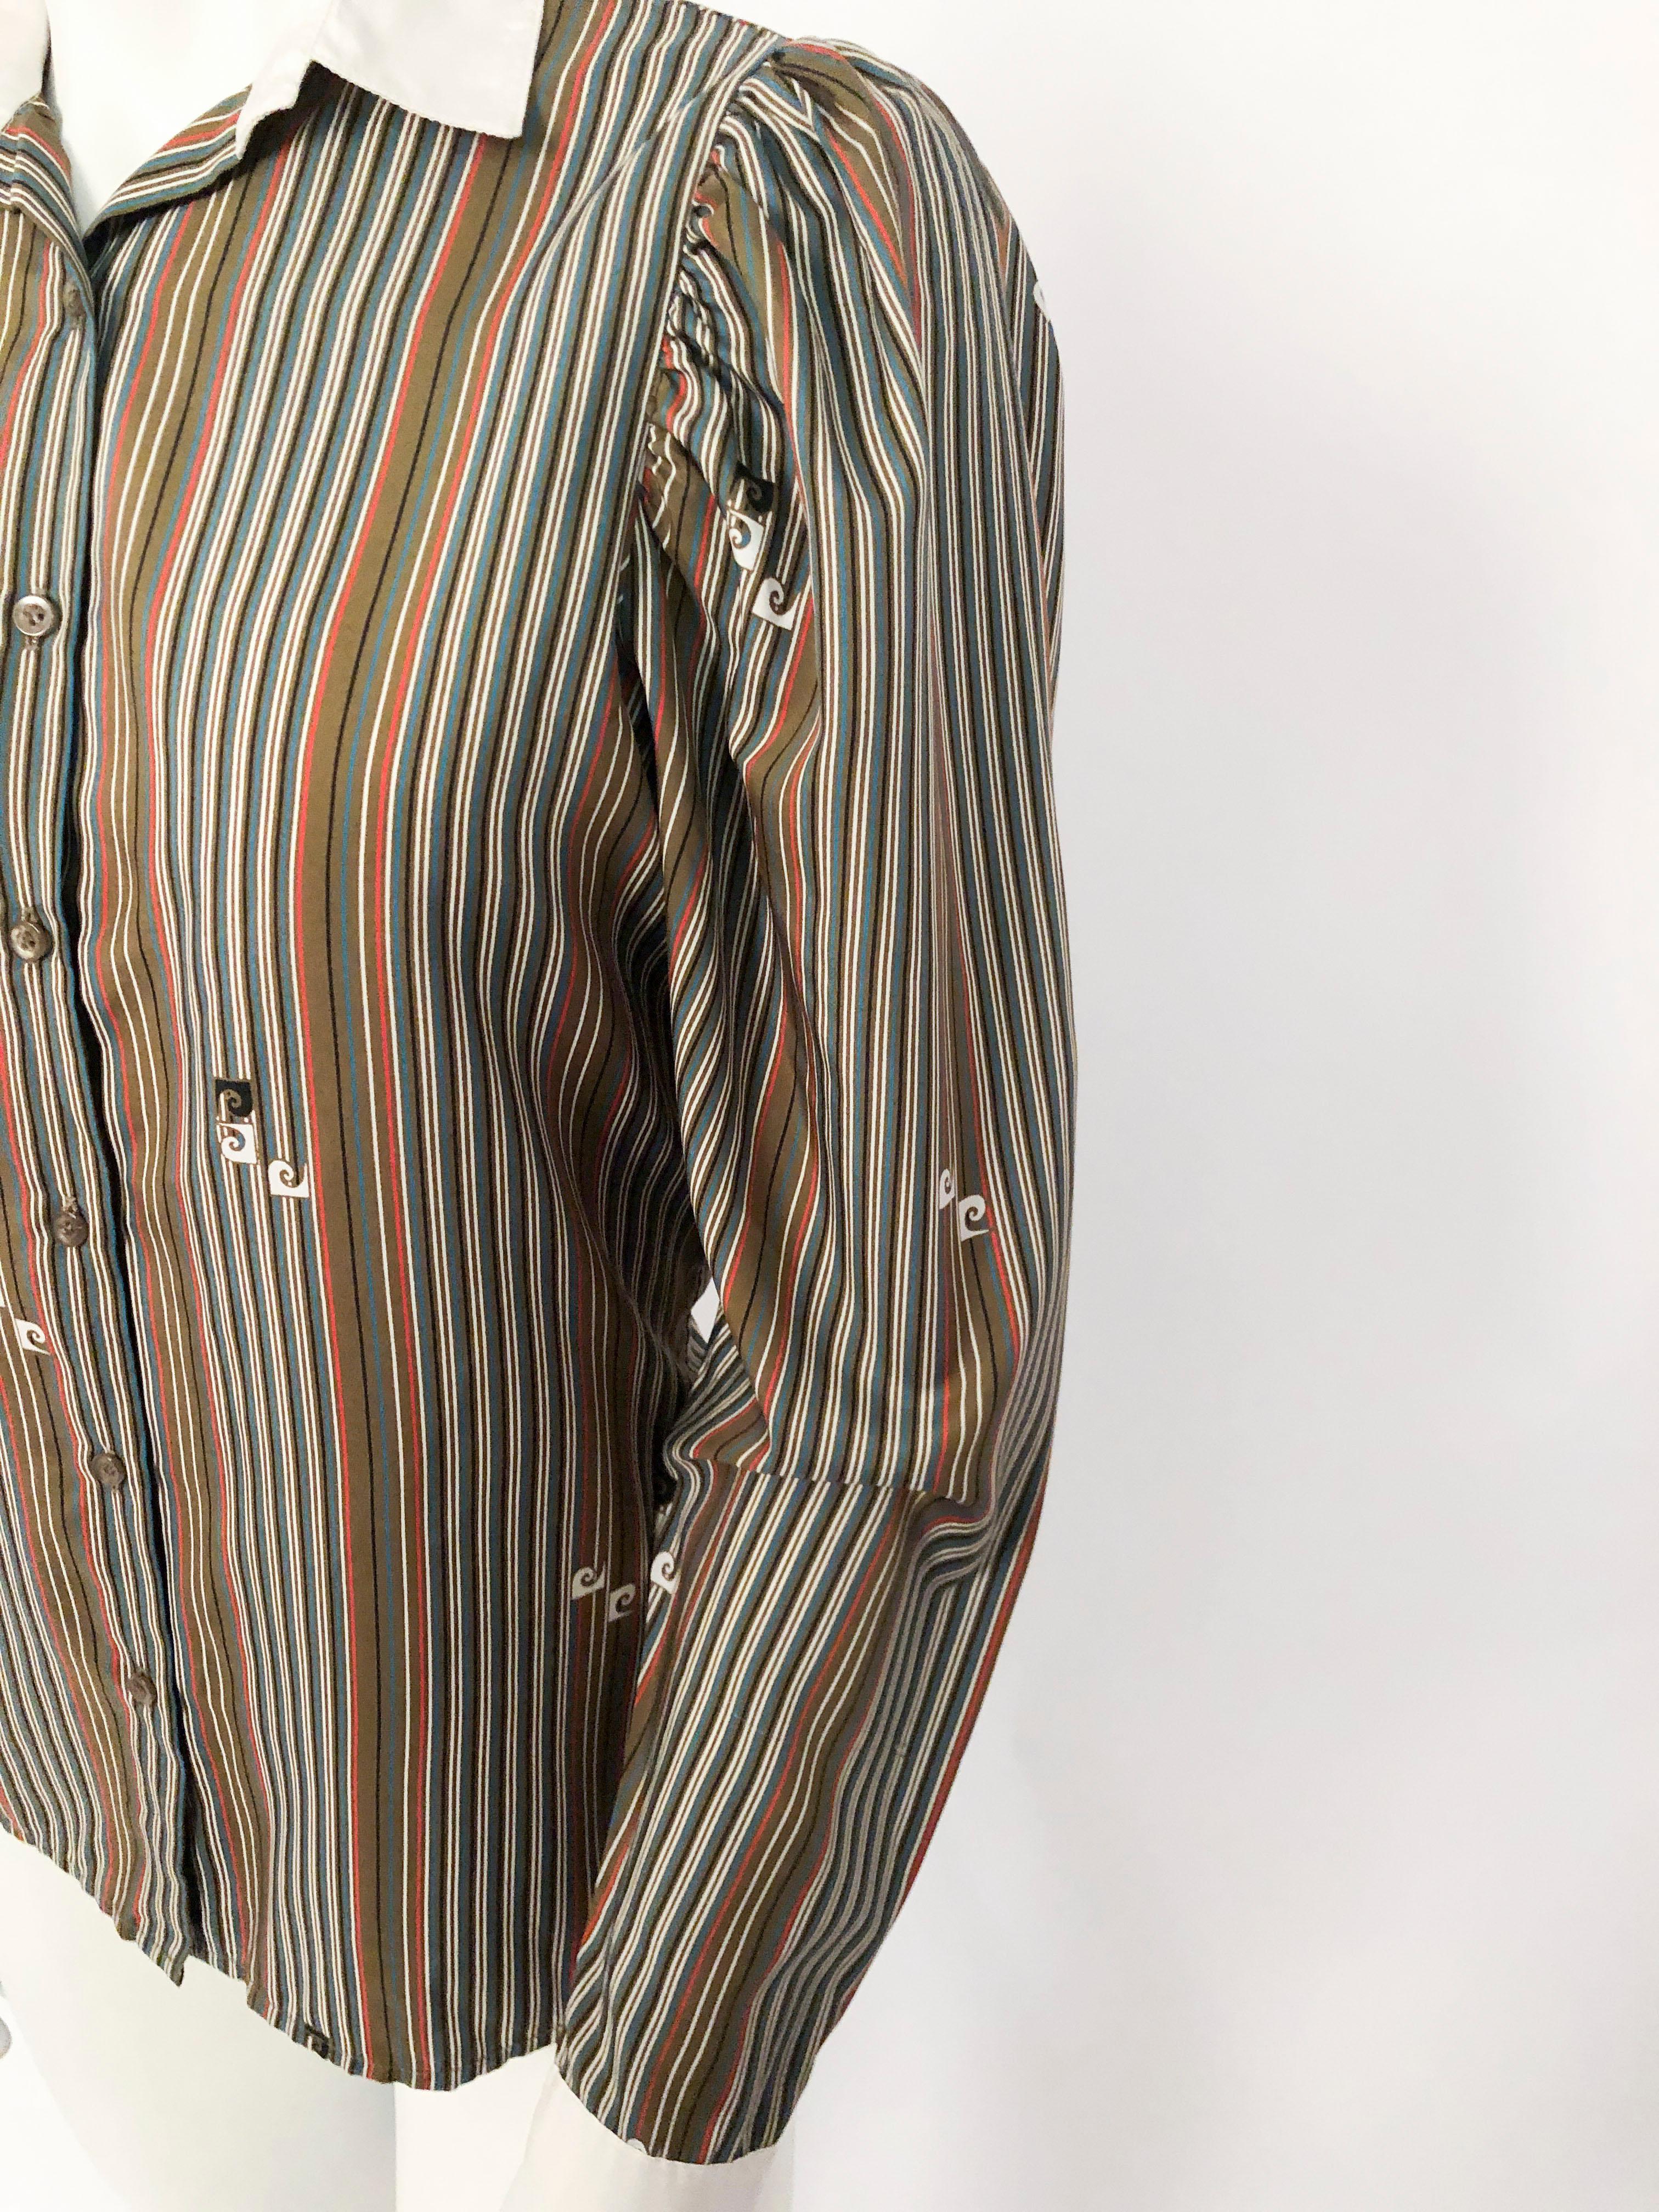 1970s Pierre Cardin Striped Blouse featuring multi-colored motif and dispersed Pierre Cardin logo. White collar and cuffs with slight puff shoulders